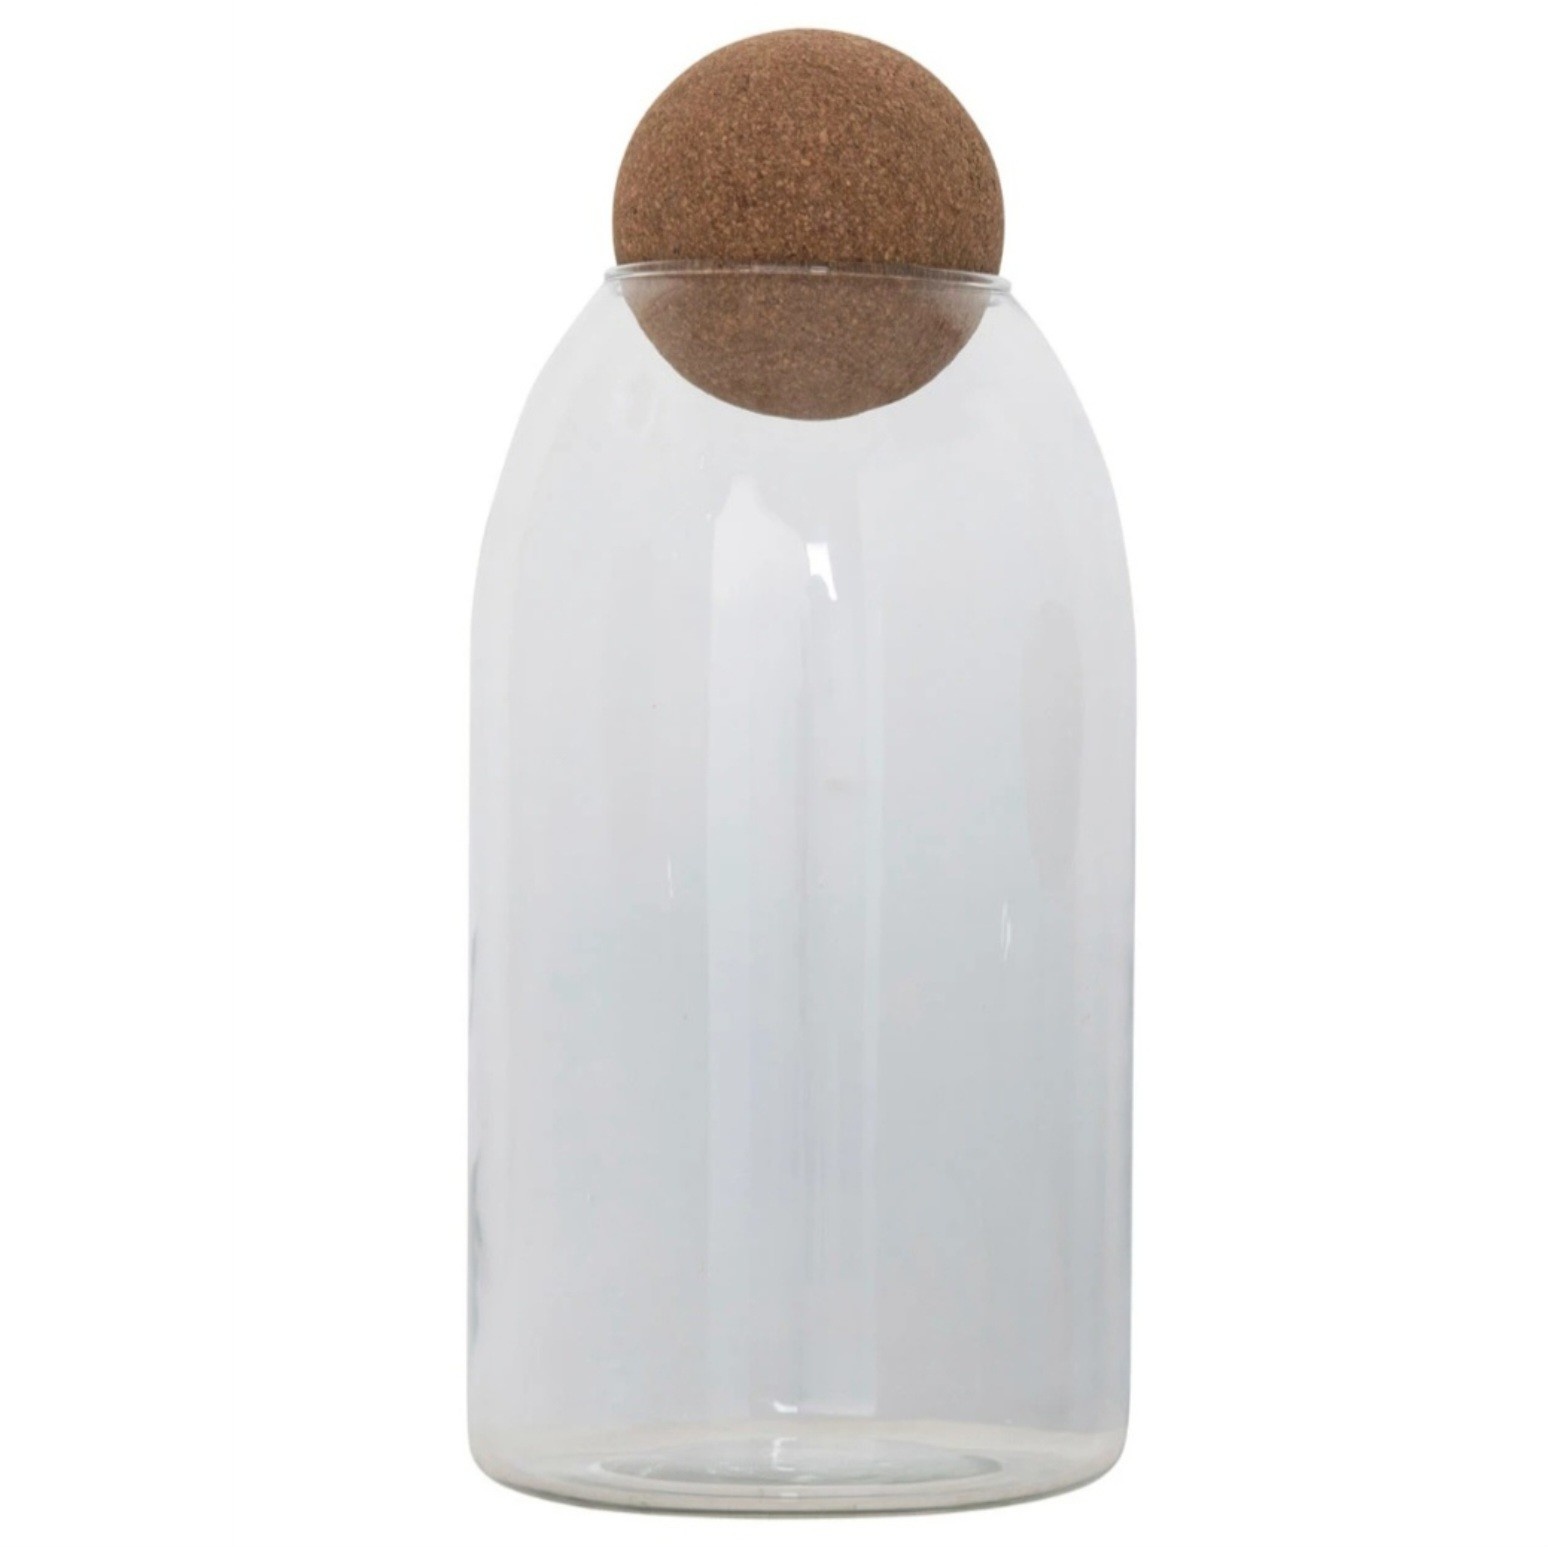 Glass Jar w/ Cork Ball Lid, Tall, 5" Round x 11-1/2"H, Available for local pick up